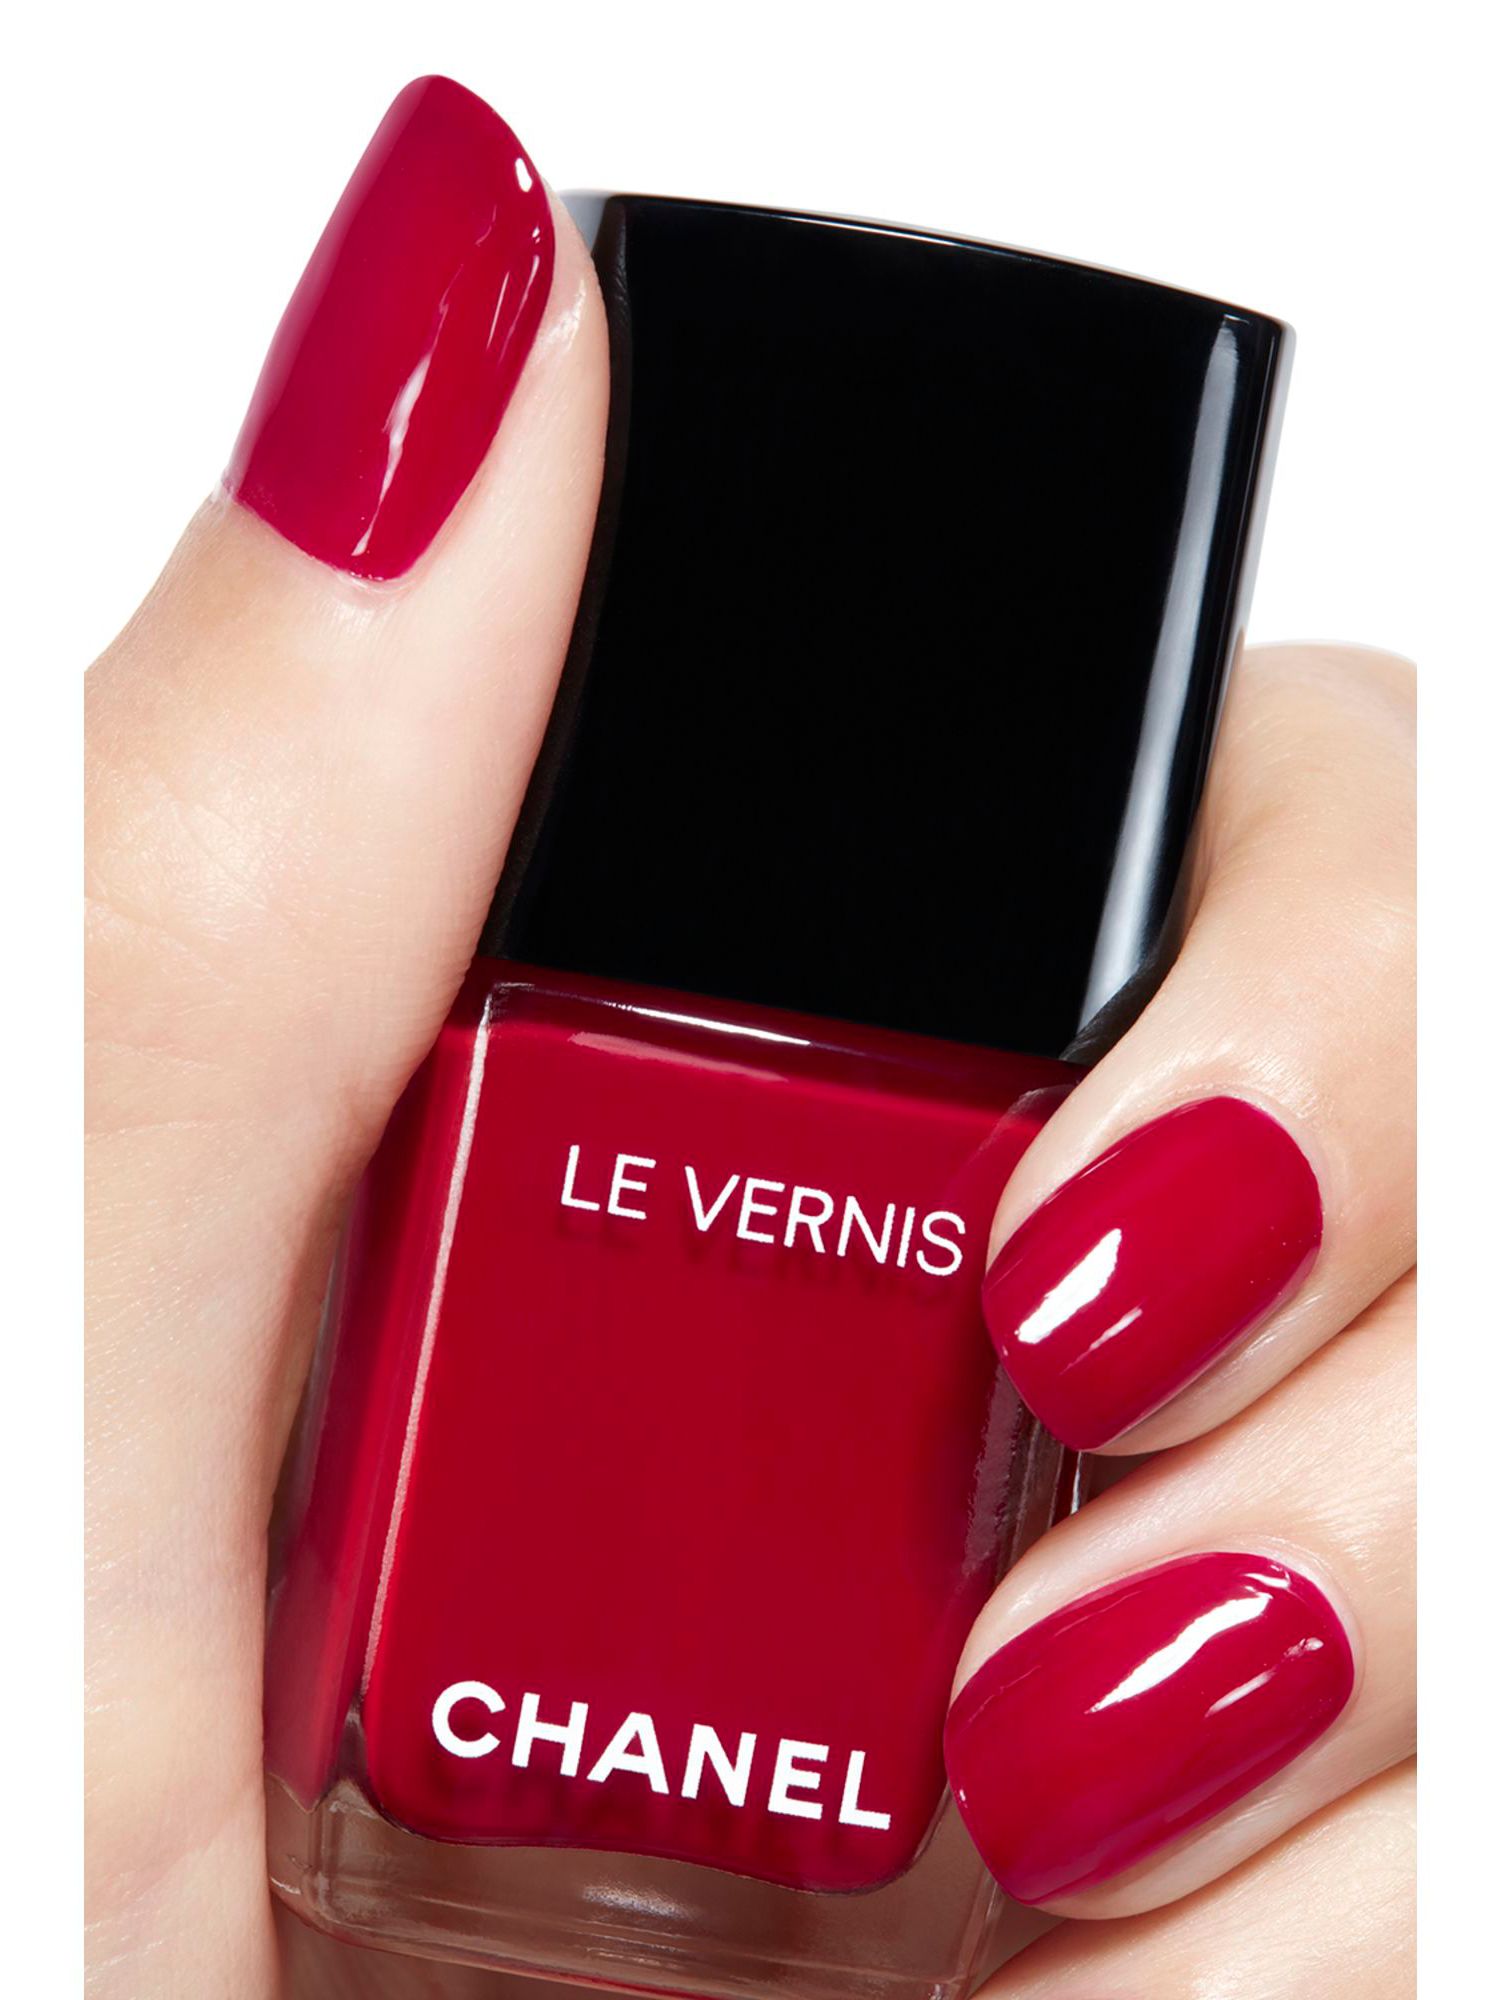 CHANEL Le Vernis Nail Colour, 151 Pirate at John Lewis & Partners